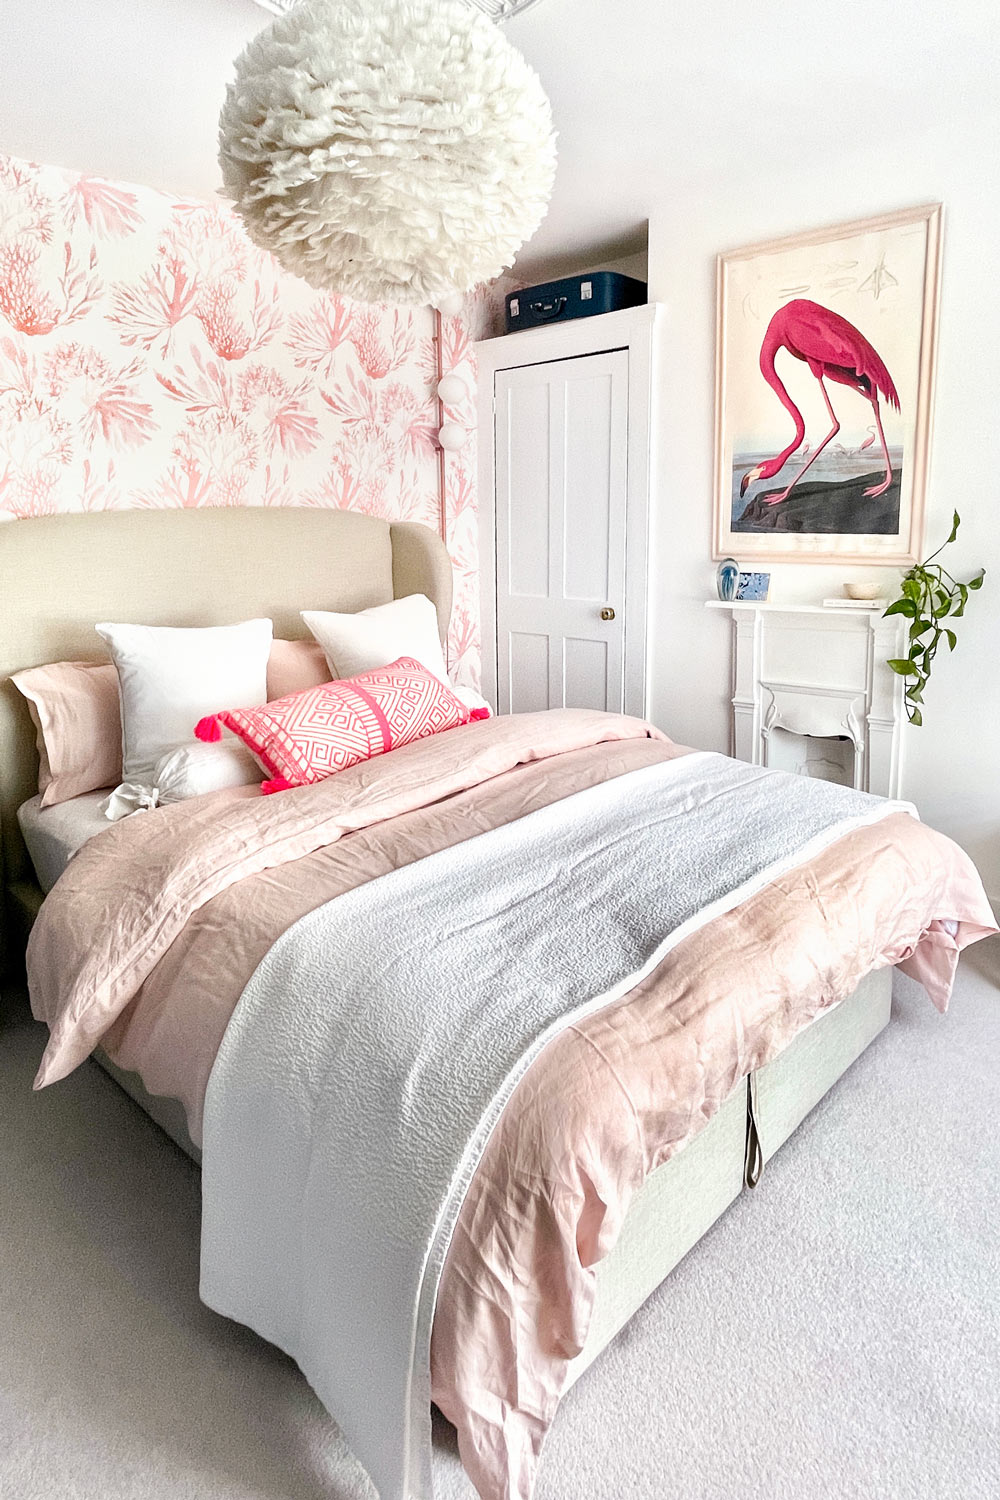 DIY small bedroom interior project featuring some colourful wallpaper design